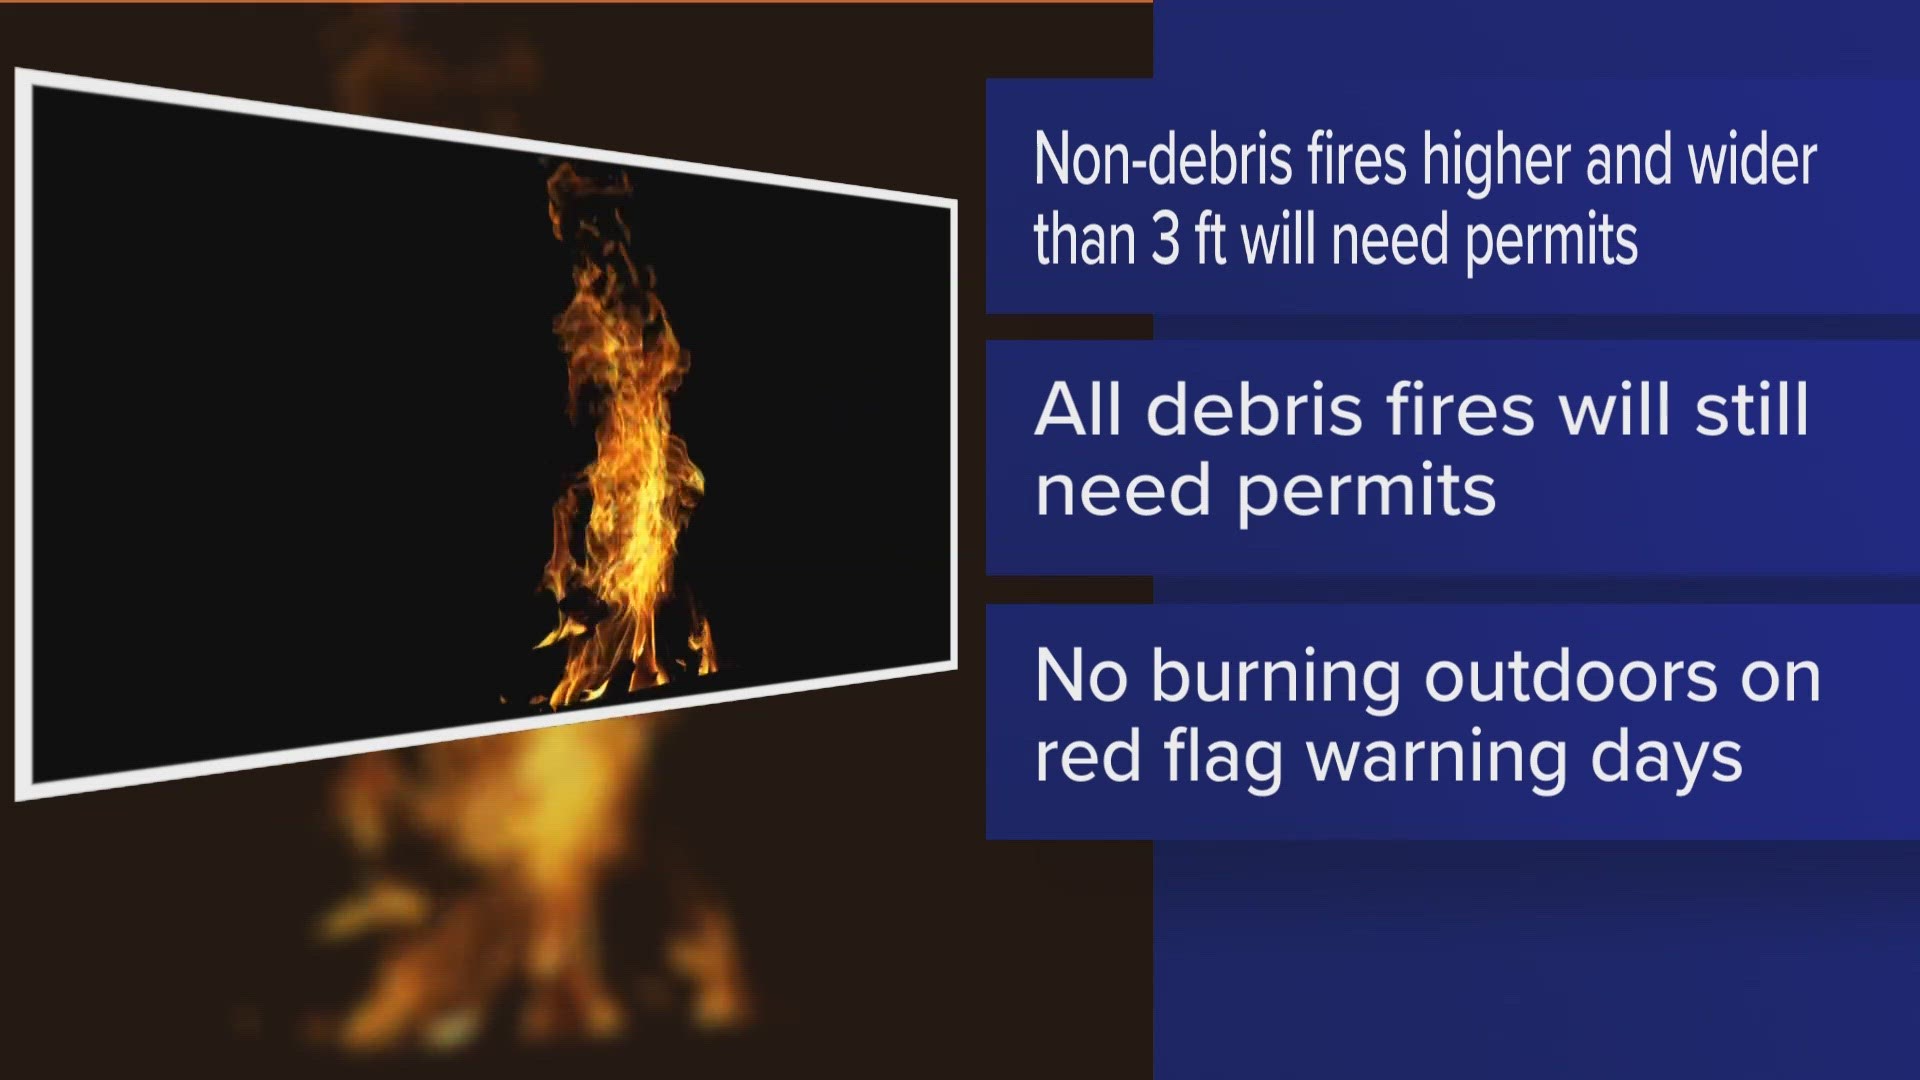 LD 24, which goes into effect Wednesday, Oct. 25, will impact fires exceeding three feet in height and three feet in diameter that are not for debris disposal.